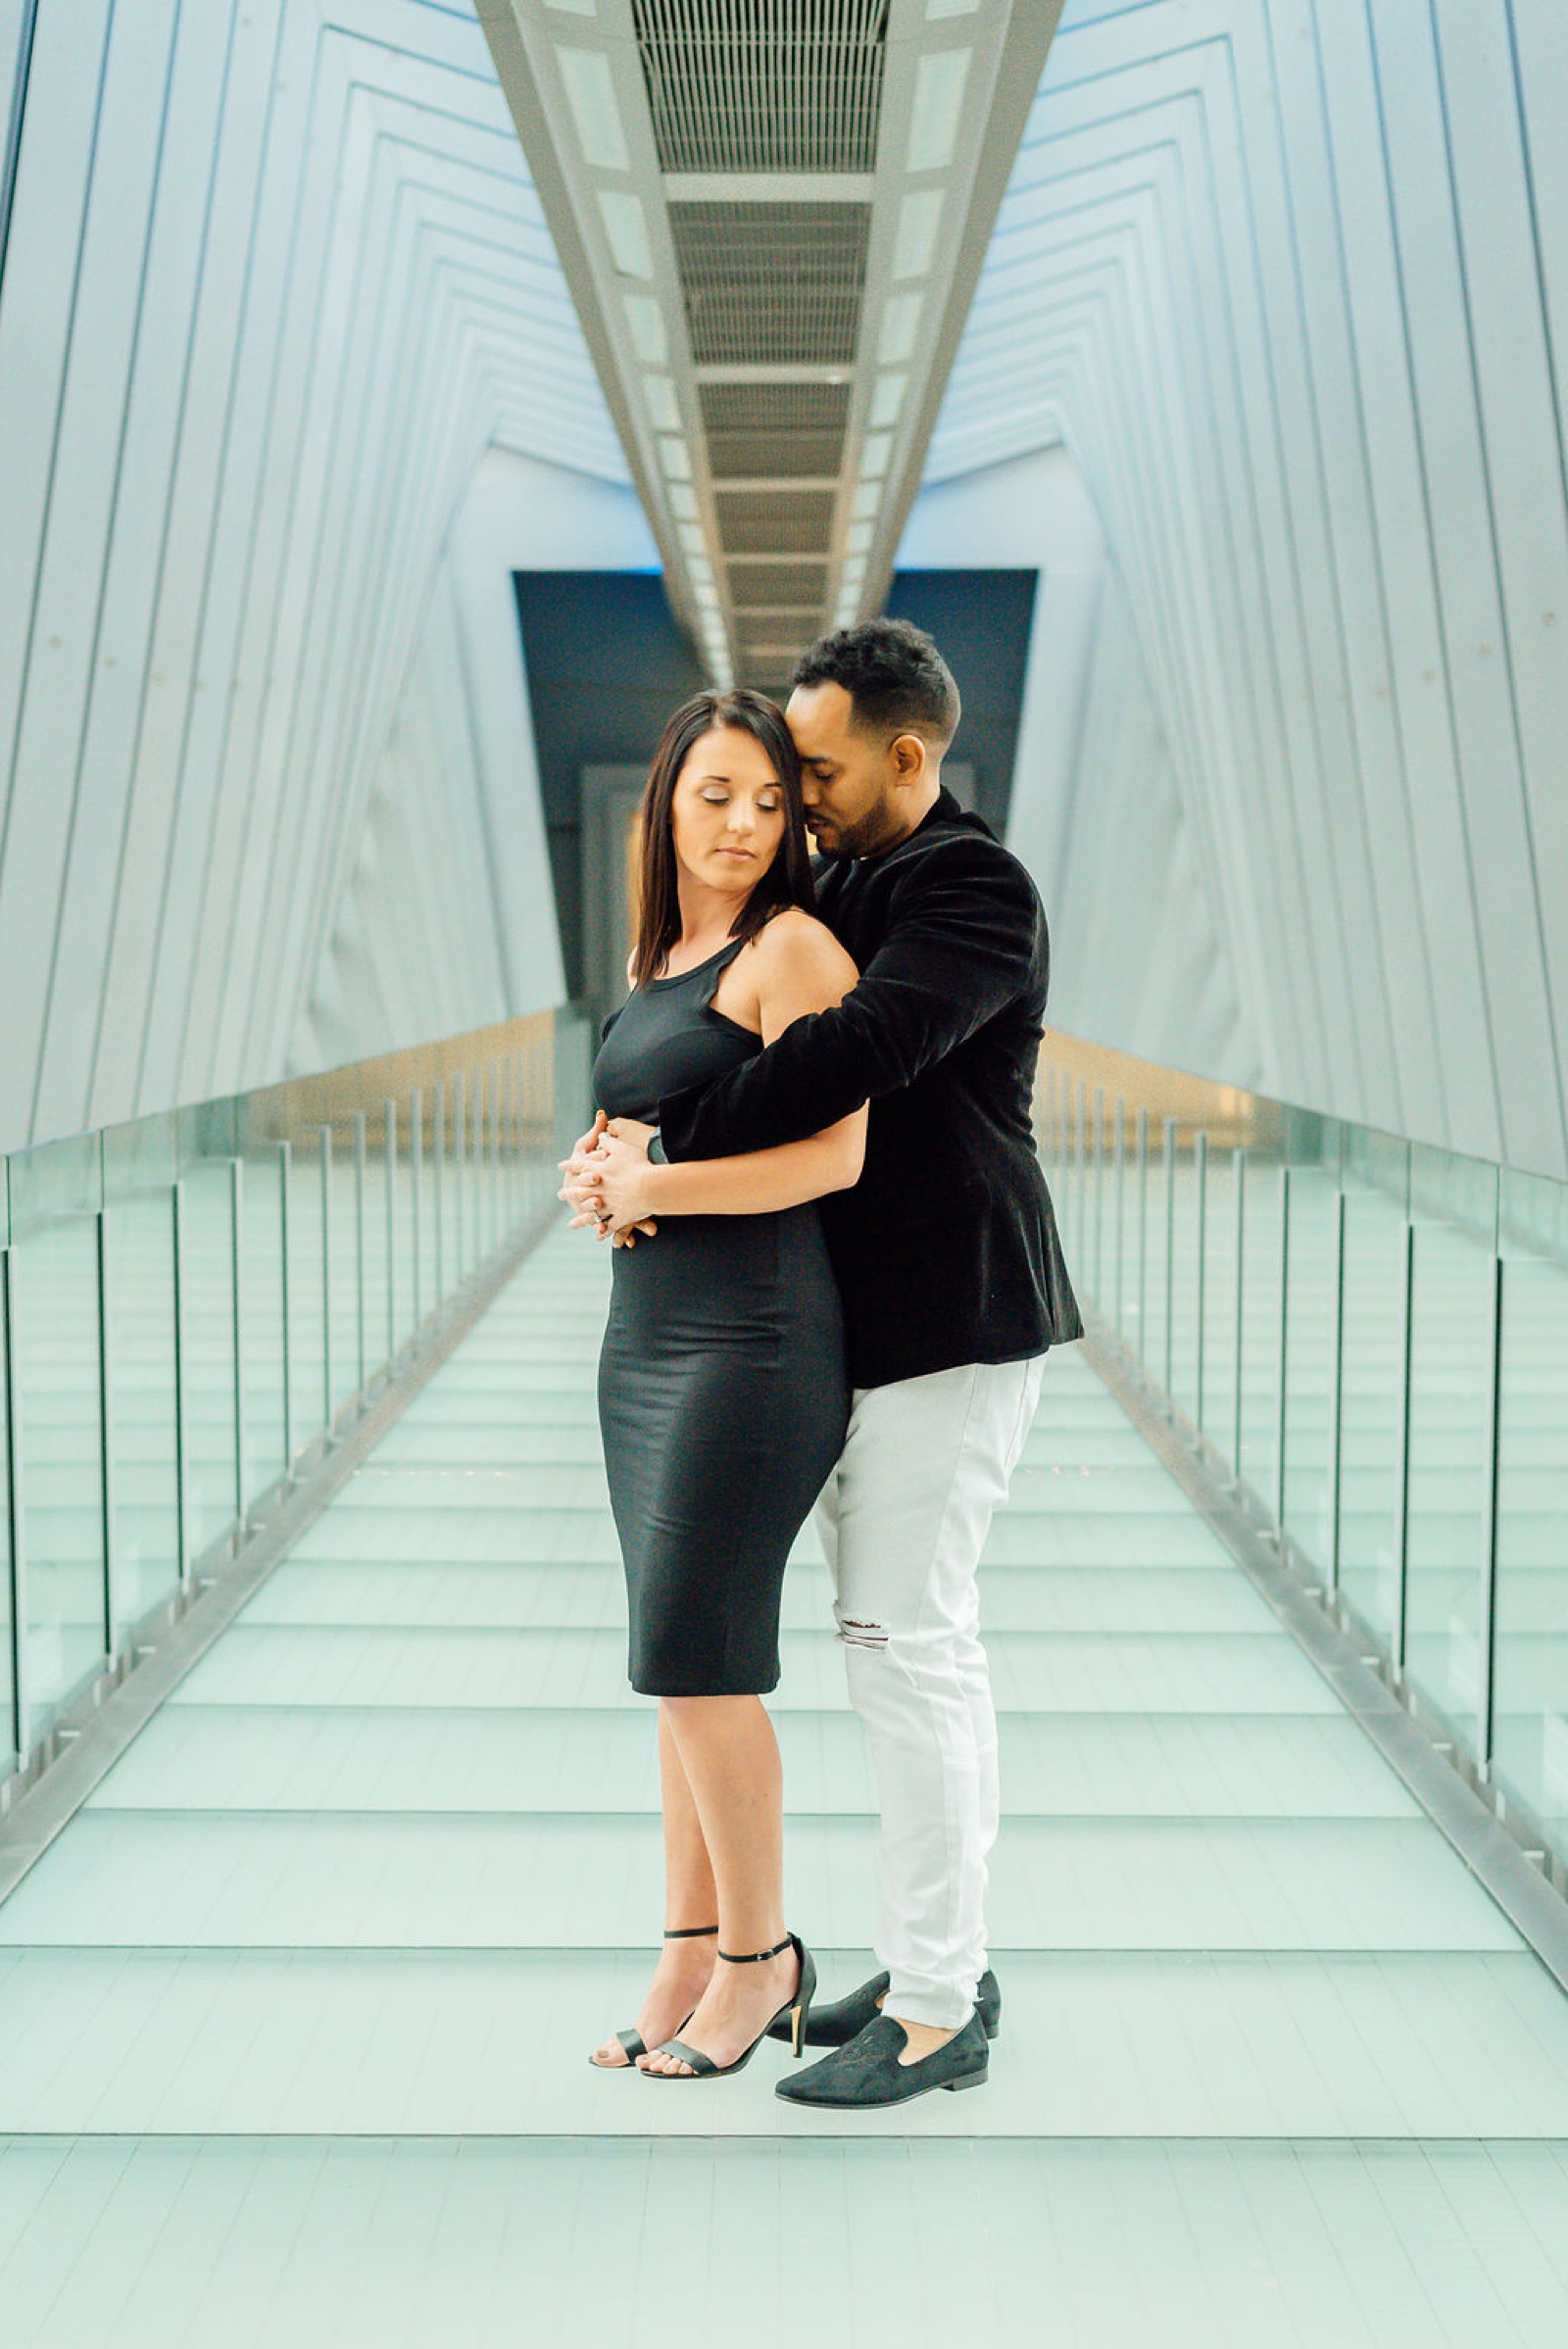 Engagement photography by Transparency Photography